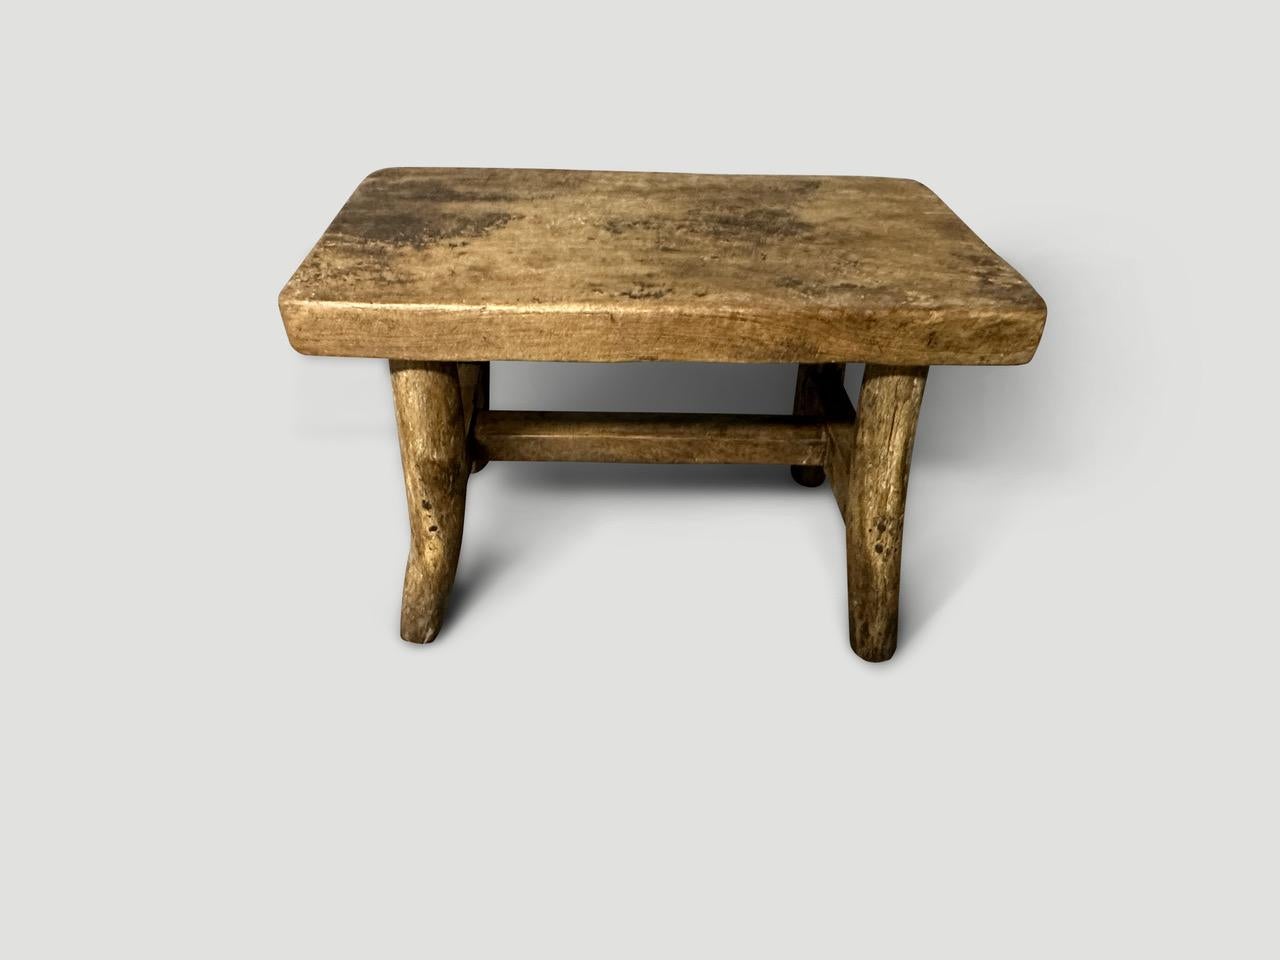 Antique hand made side table or small bench with a single thick top. Lovely patina and character on this beautiful piece. Circa 1950

This side table or bench was hand made in the spirit of Wabi-Sabi, a Japanese philosophy that beauty can be found